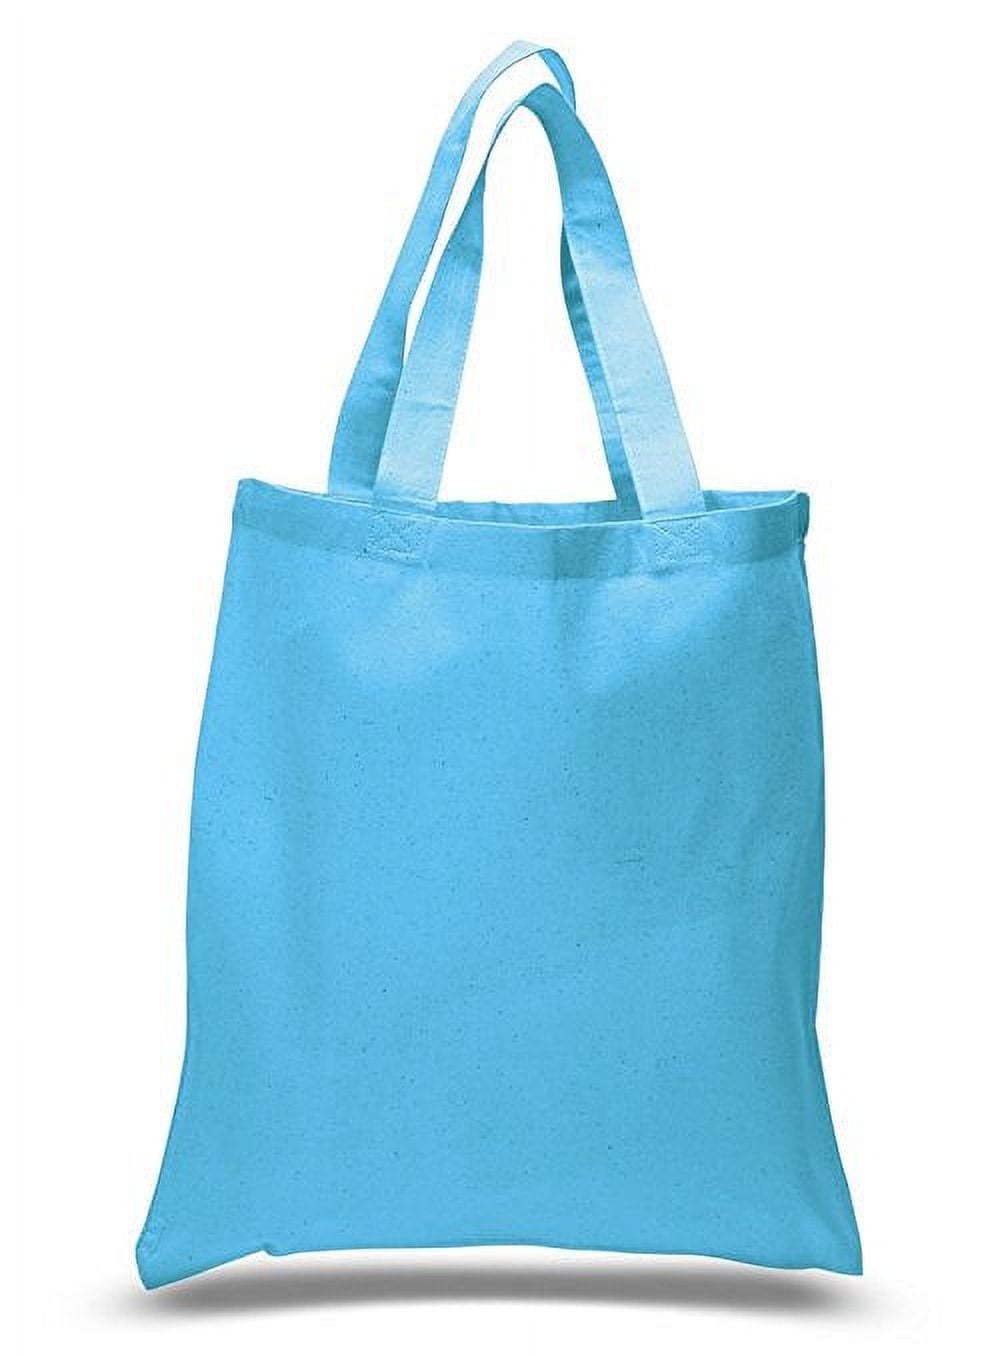 Canvas Tote Bag W/Color Handles Art Craft Blank Tote Bags 1-Pack 